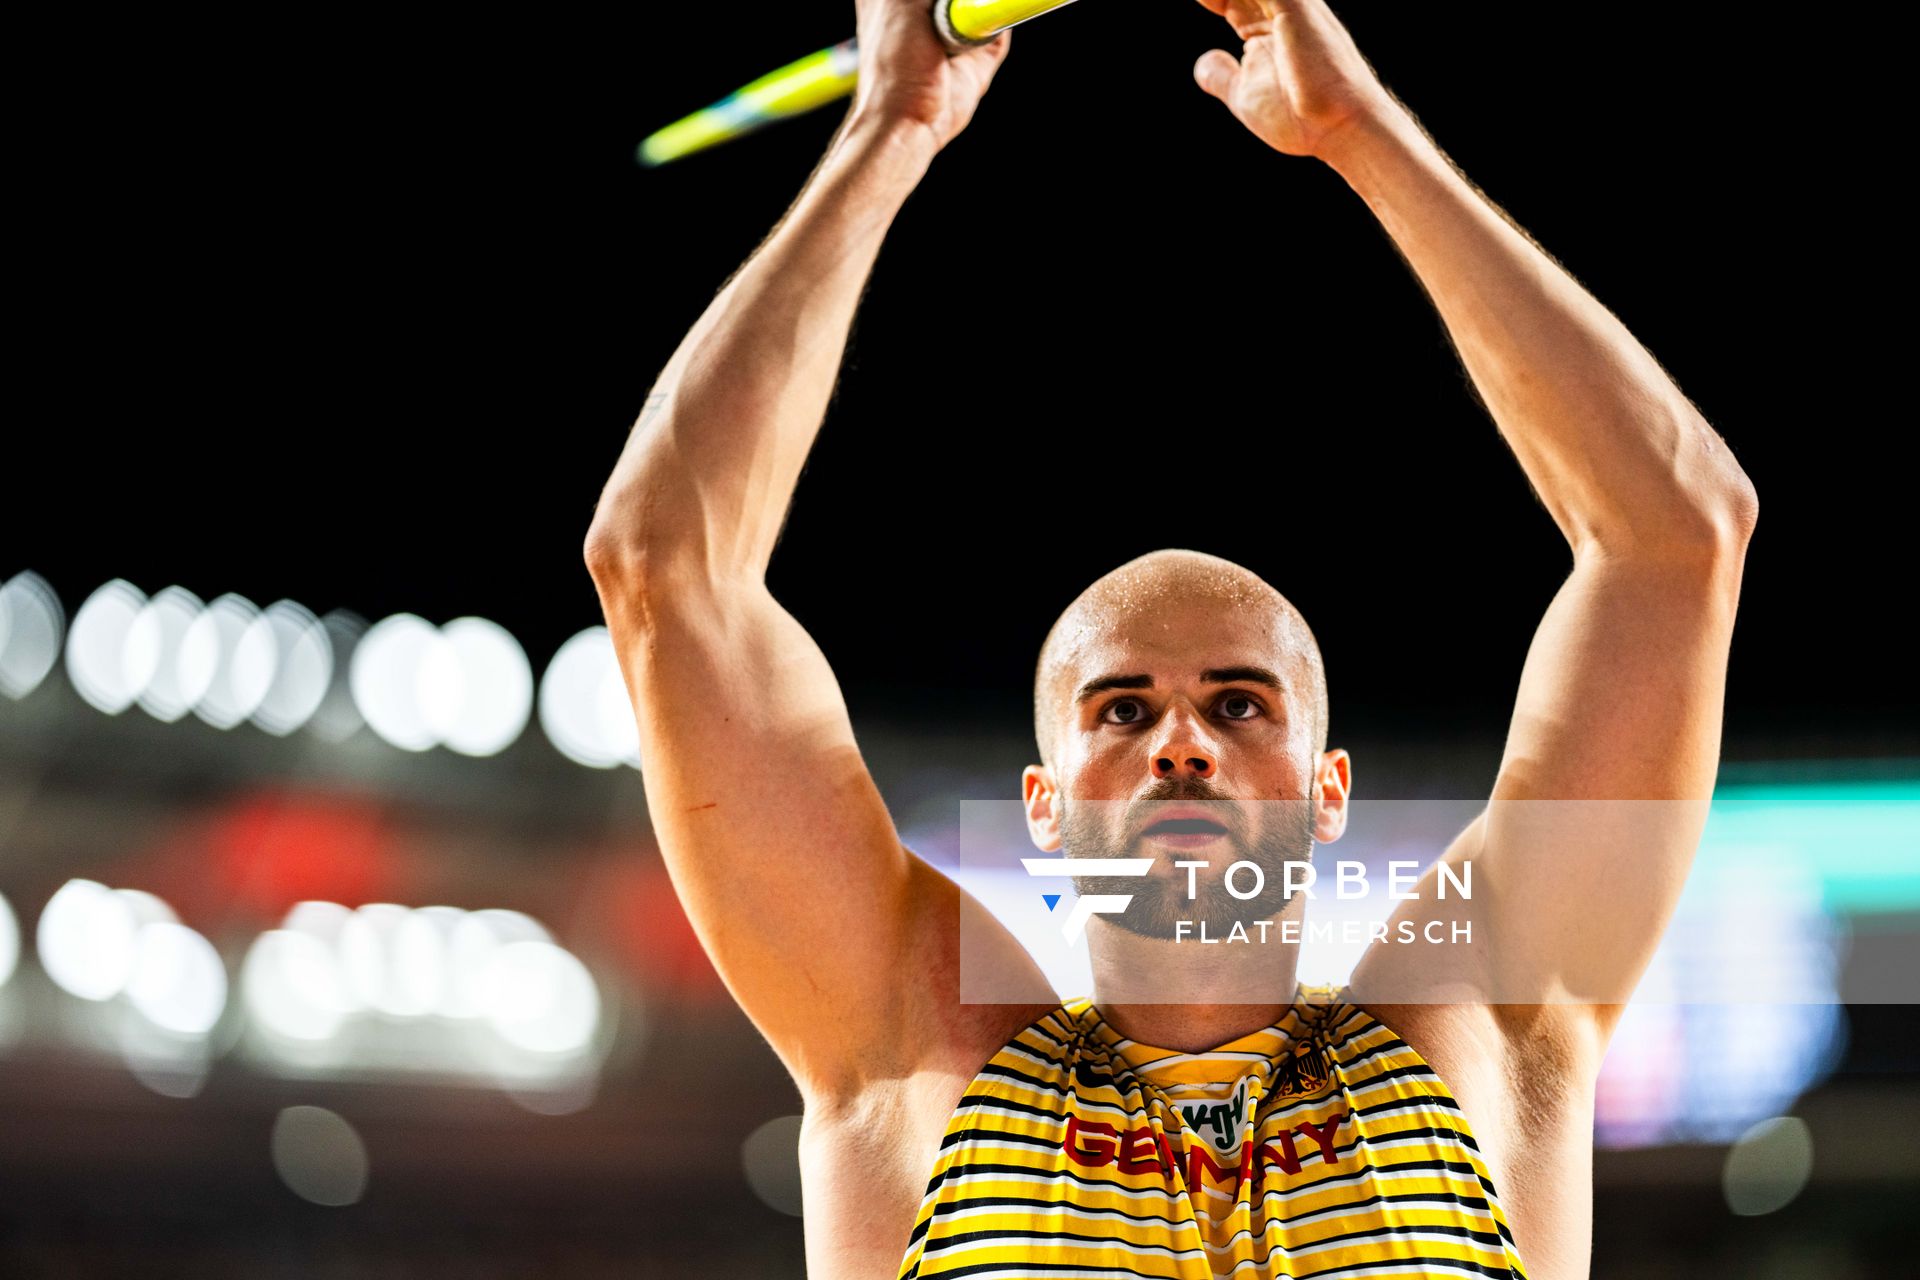 Julian Weber (GER/Germany) during the Javelin Throw Final on Day 9 of the World Athletics Championships Budapest 23 at the National Athletics Centre in Budapest, Hungary on August 27, 2023.